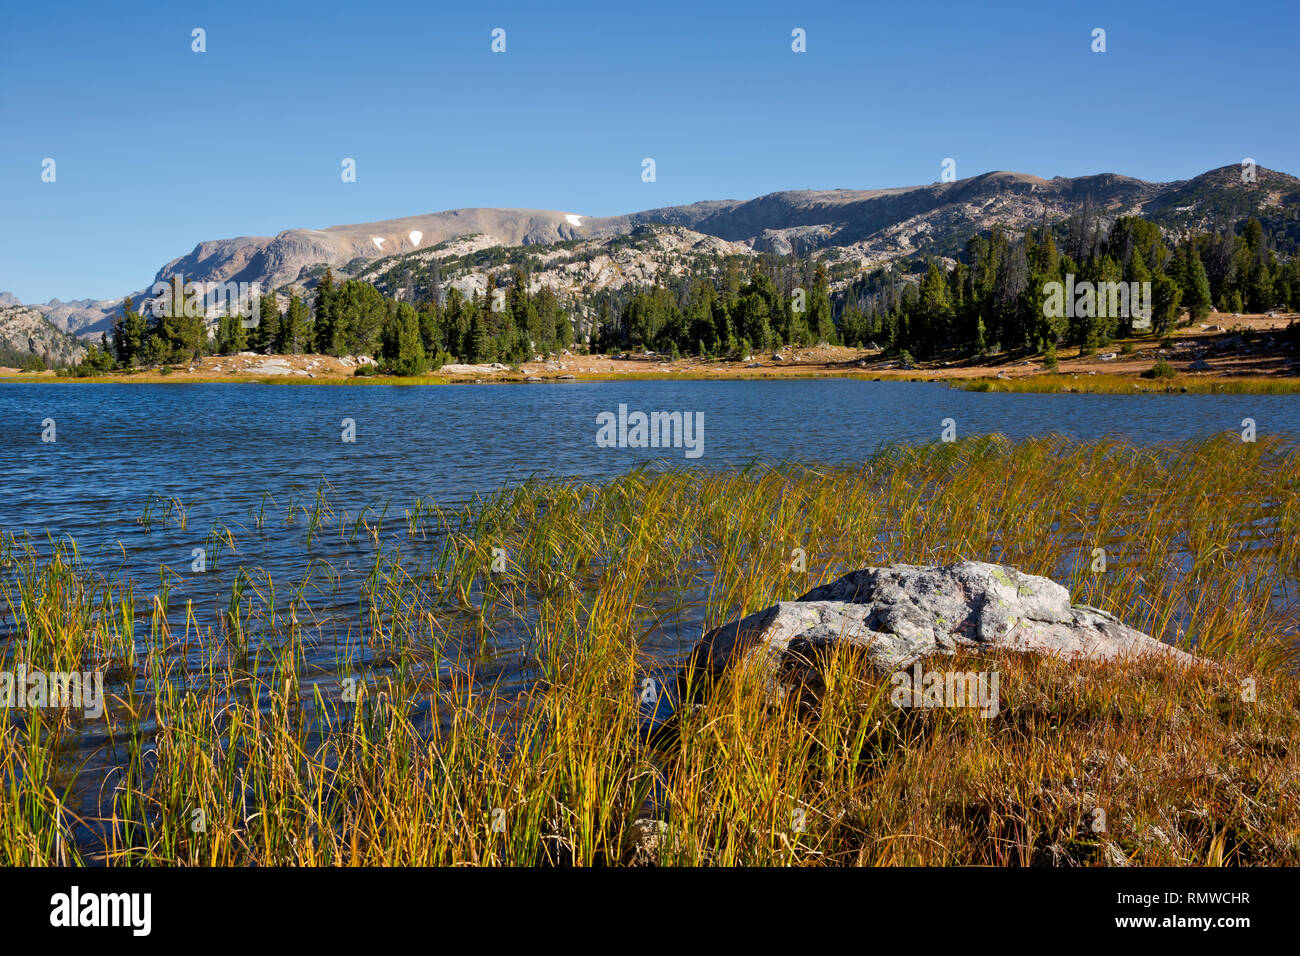 WY03758-00...WYOMING - The shoreline of a lake along the Beartooth Hghlakes Trail in the Beartooth Mountains area of the Shoshone National Forest. Stock Photo